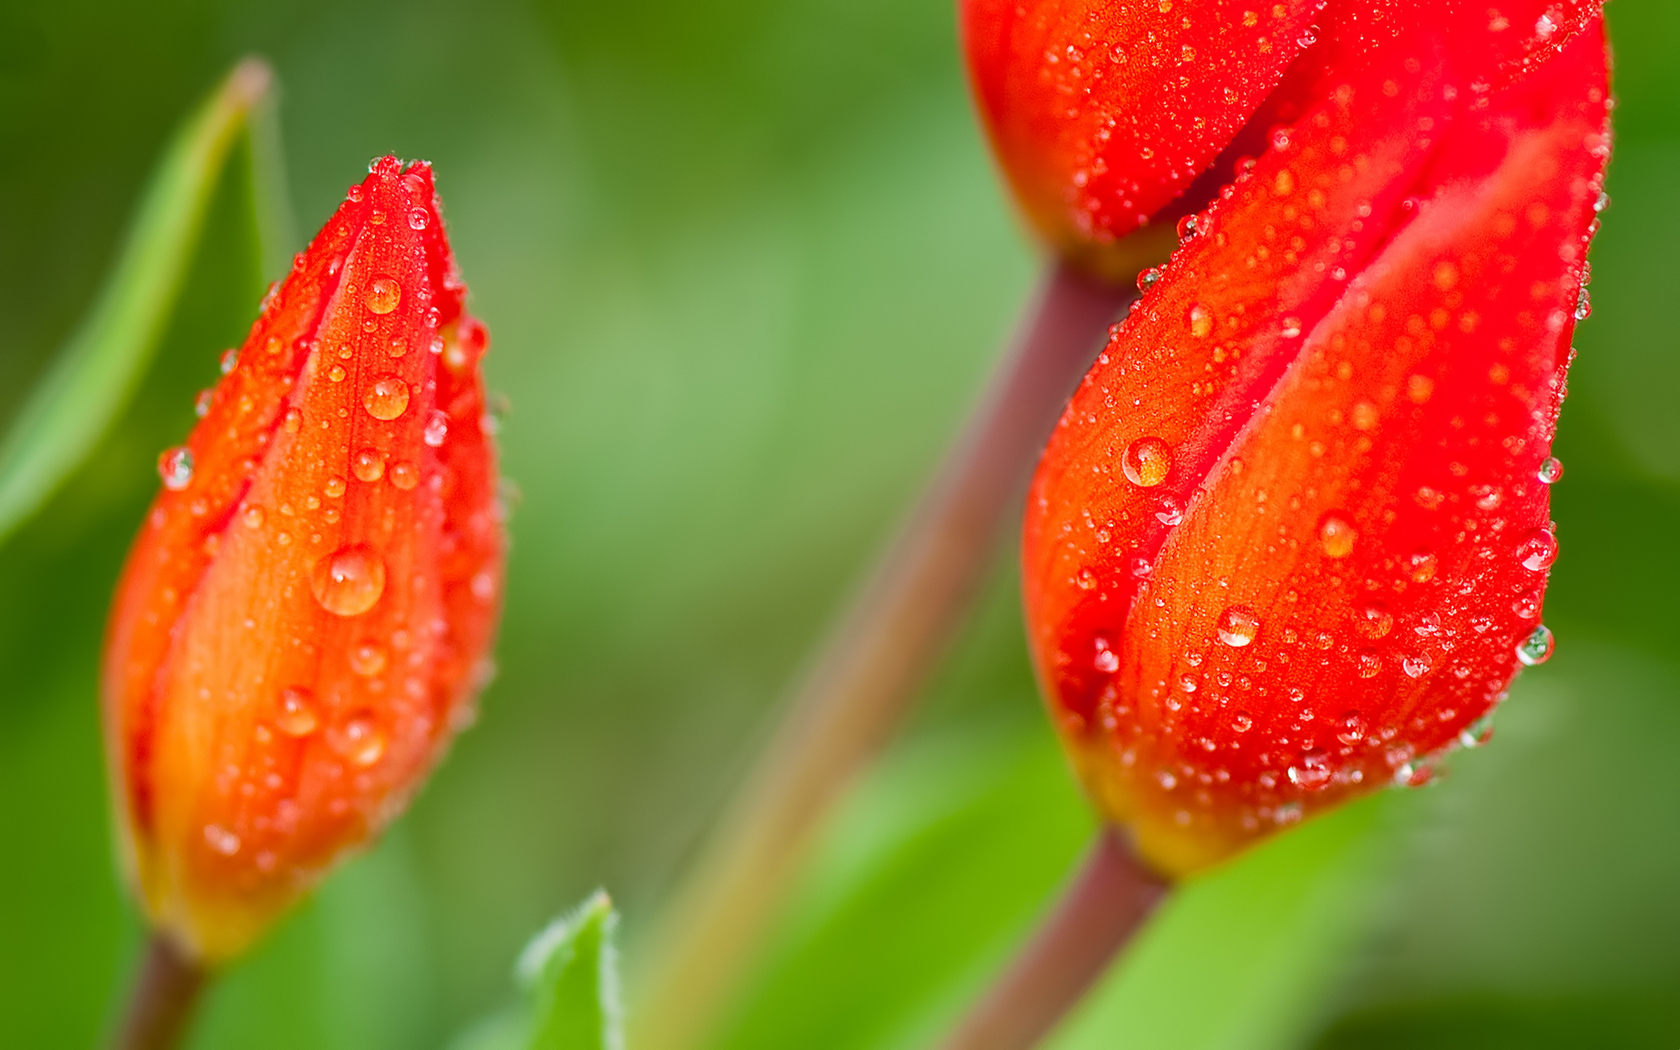 Nice Red Blooming Flowers | 1680 x 1050 | Download | Close